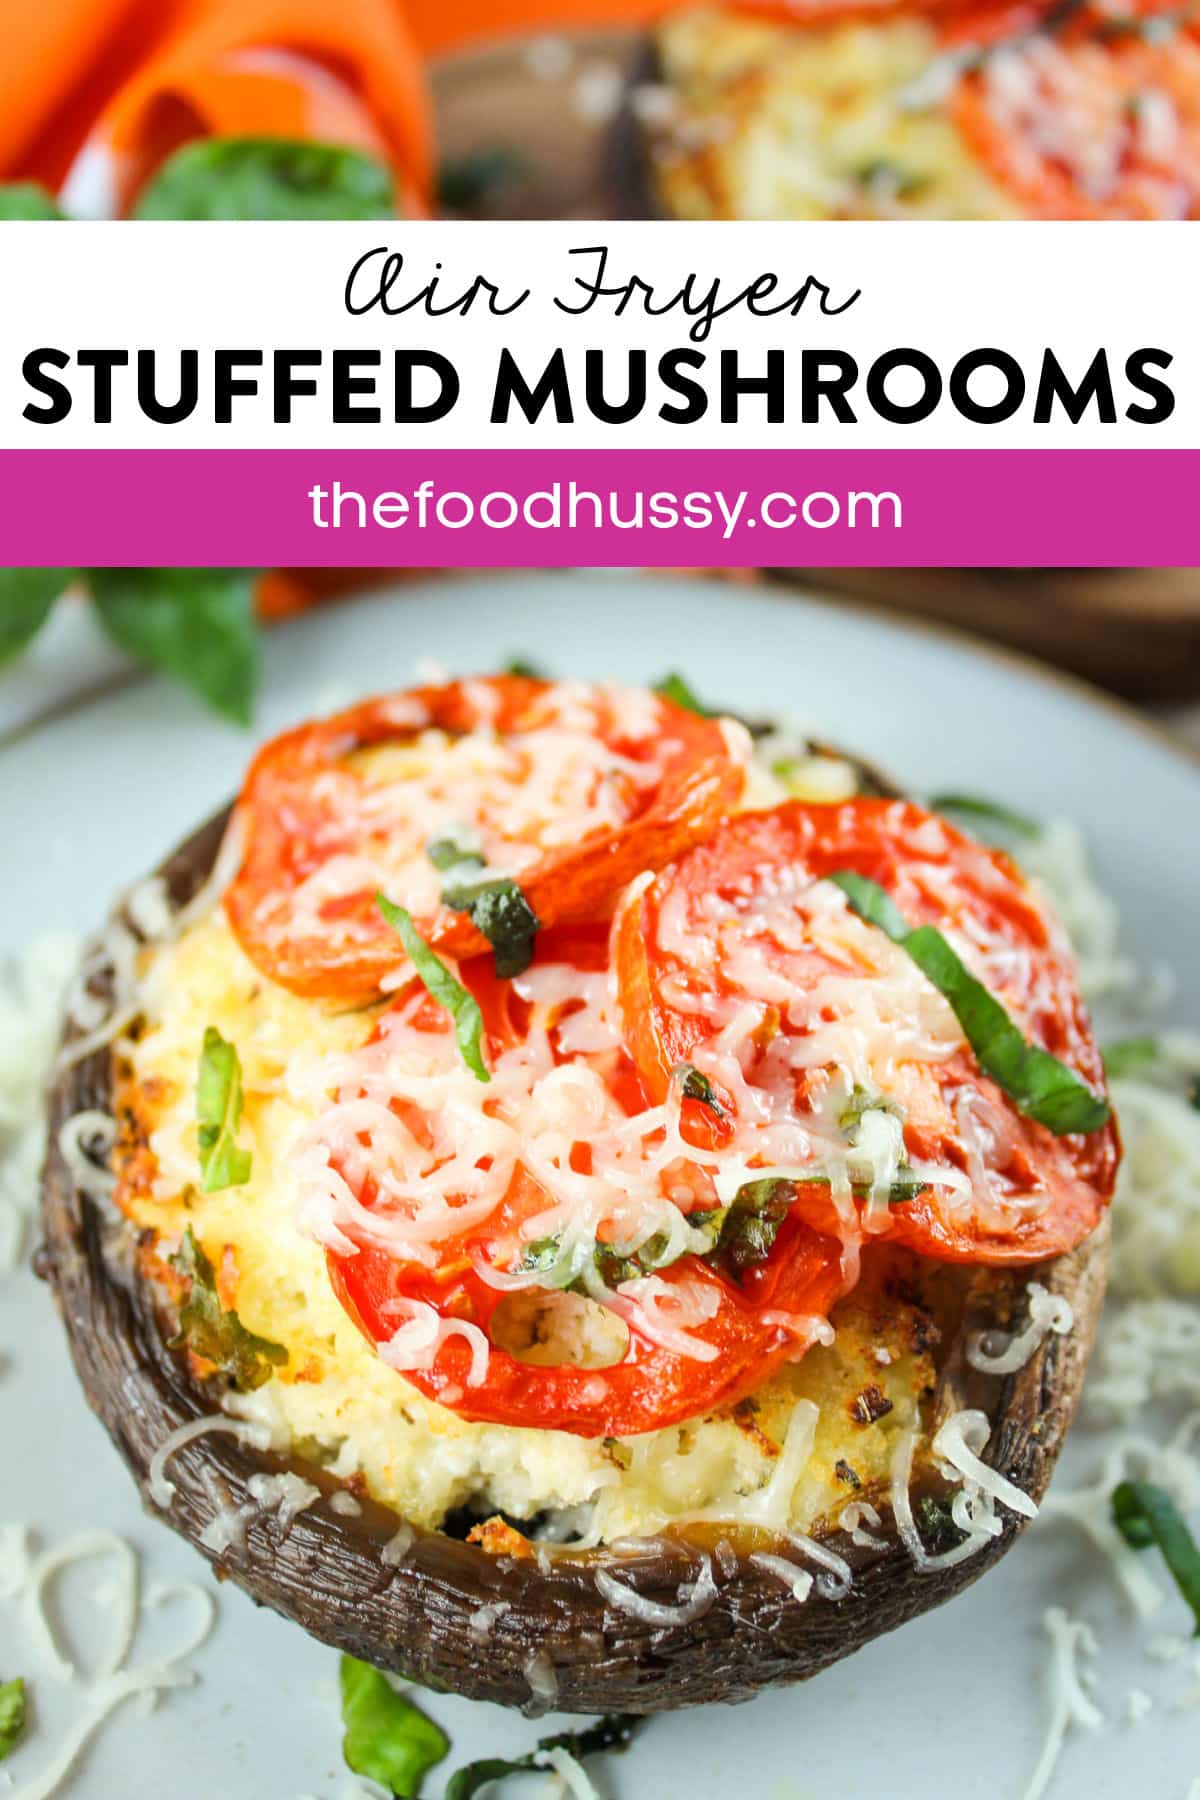 These Air Fryer Stuffed Portobello Mushrooms are the perfect entree, side dish or appetizer for dinner. They're filled with cheeses and will be on the table in less than 15 minutes! via @foodhussy